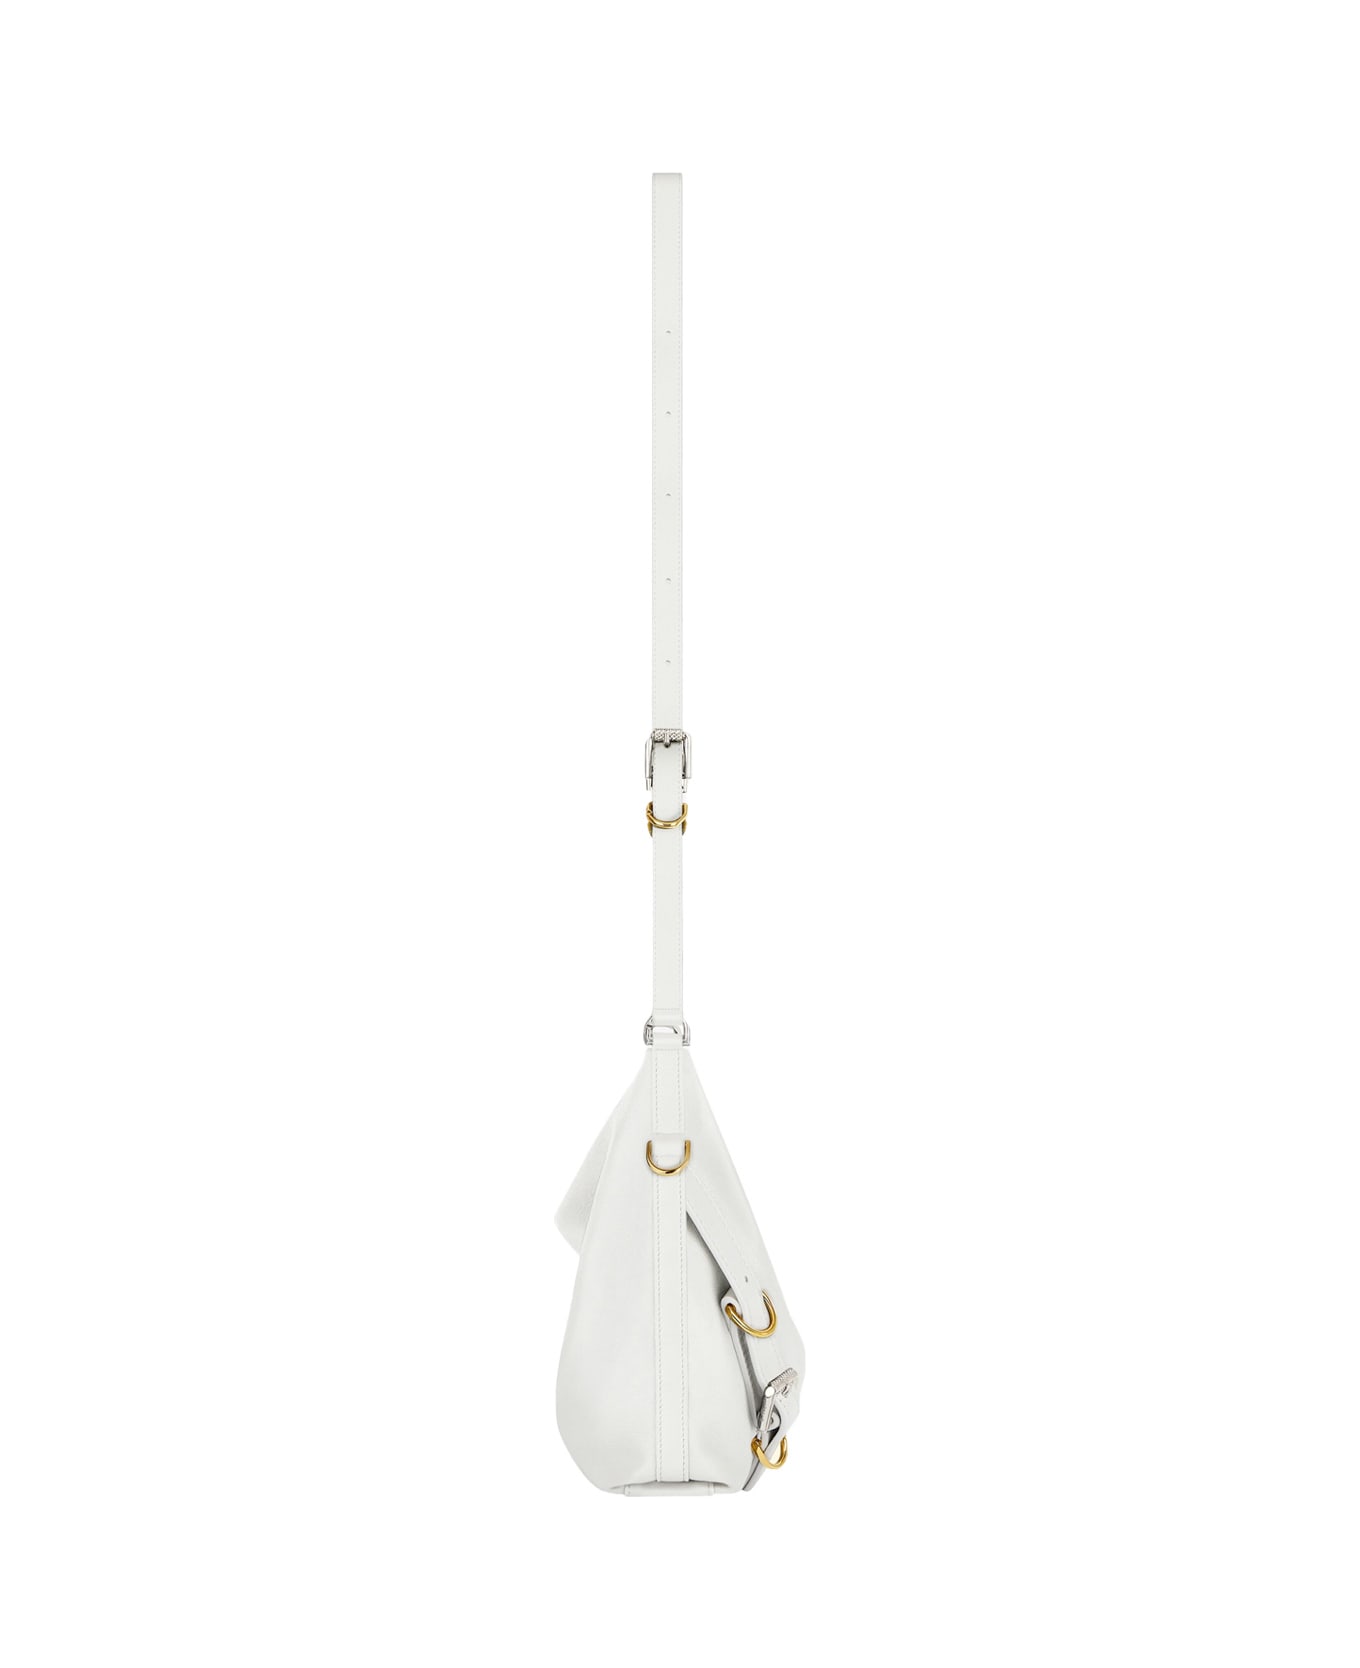 Givenchy Voyou Crossbody Bag In Ivory Leather - White